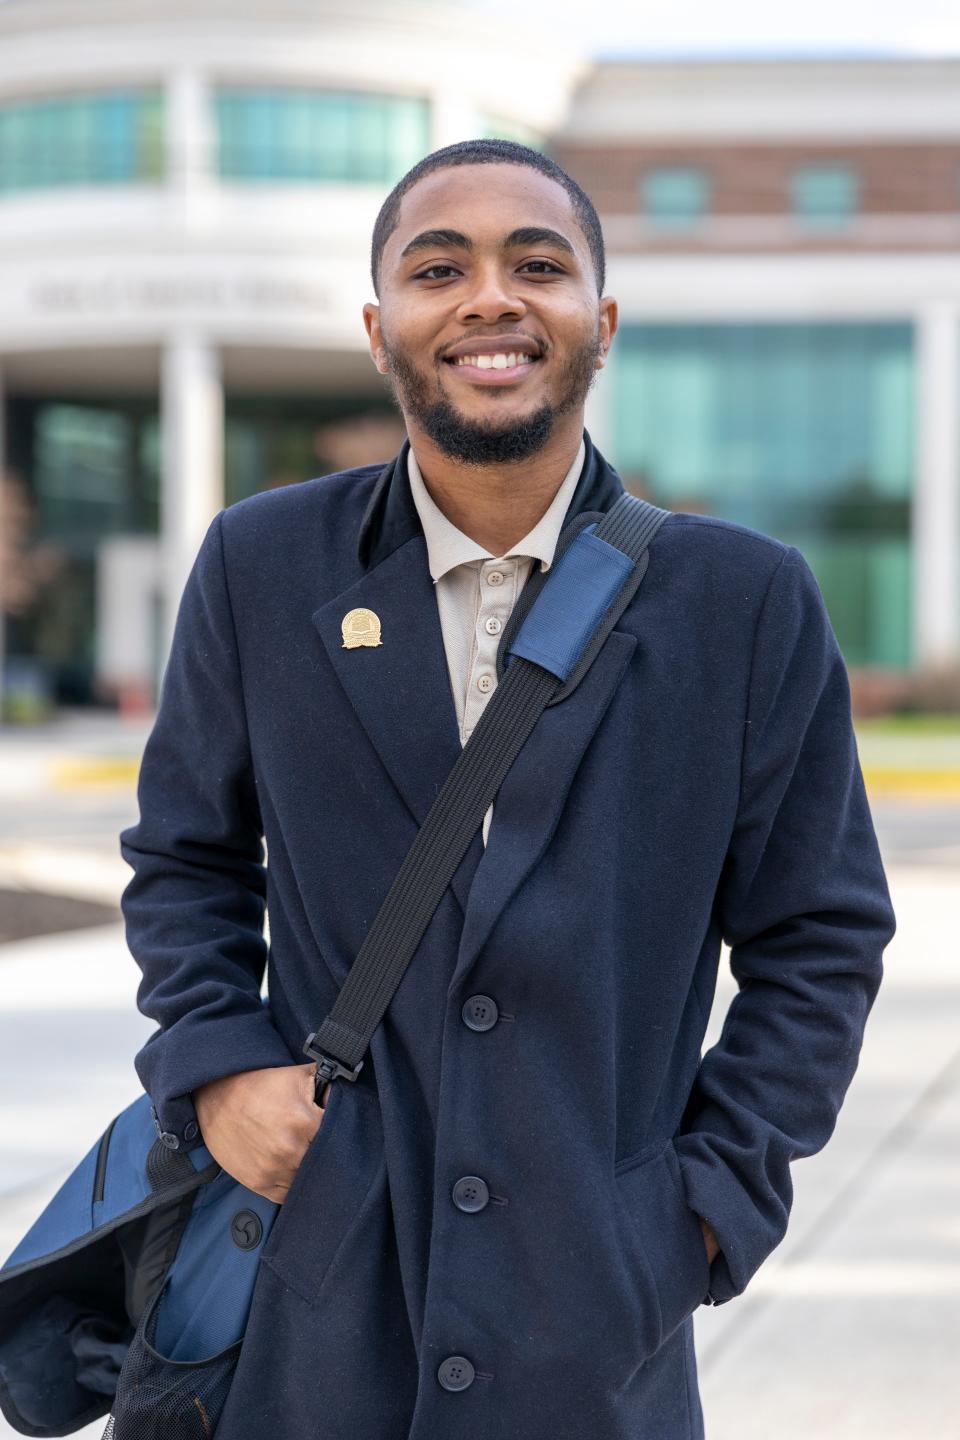 David Hawkins, senior and president of the Student Government Association, poses on Delaware State University's main campus in Dover, Delaware, on Nov. 17, 2022.